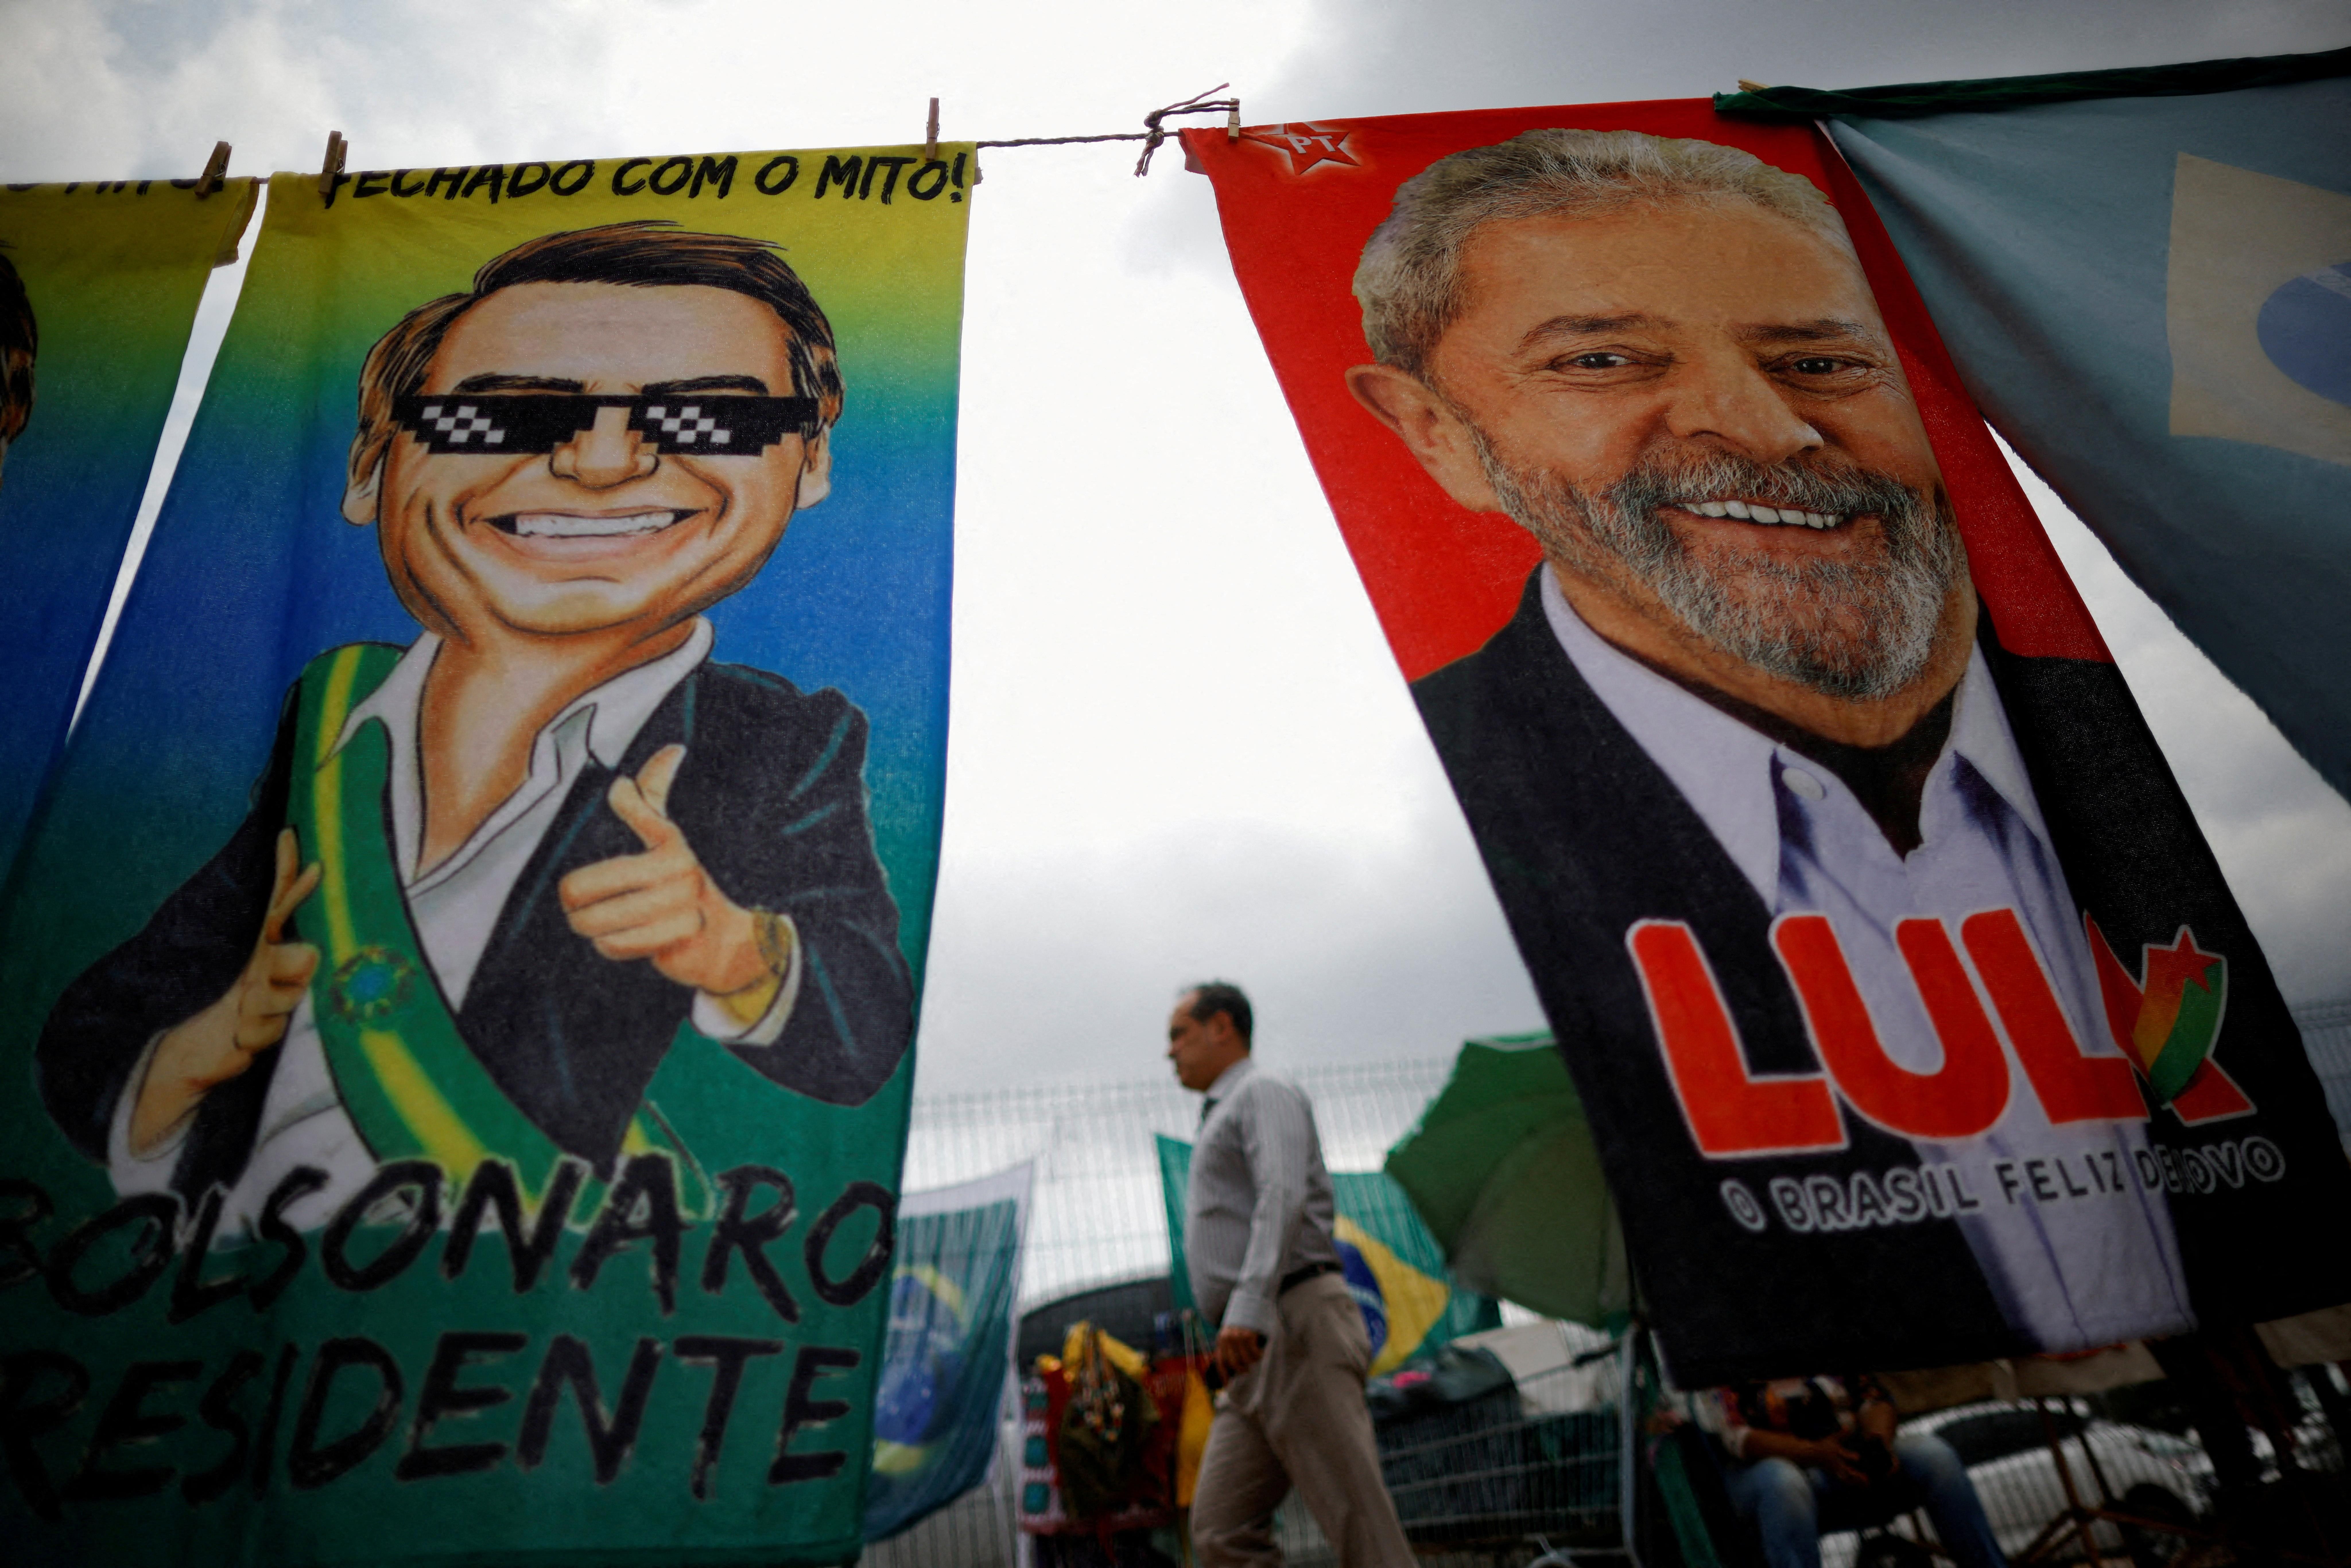 A man walks past Brazilian presidential campaign materials showing candidates Lula and Bolsonaro in Brasilia.